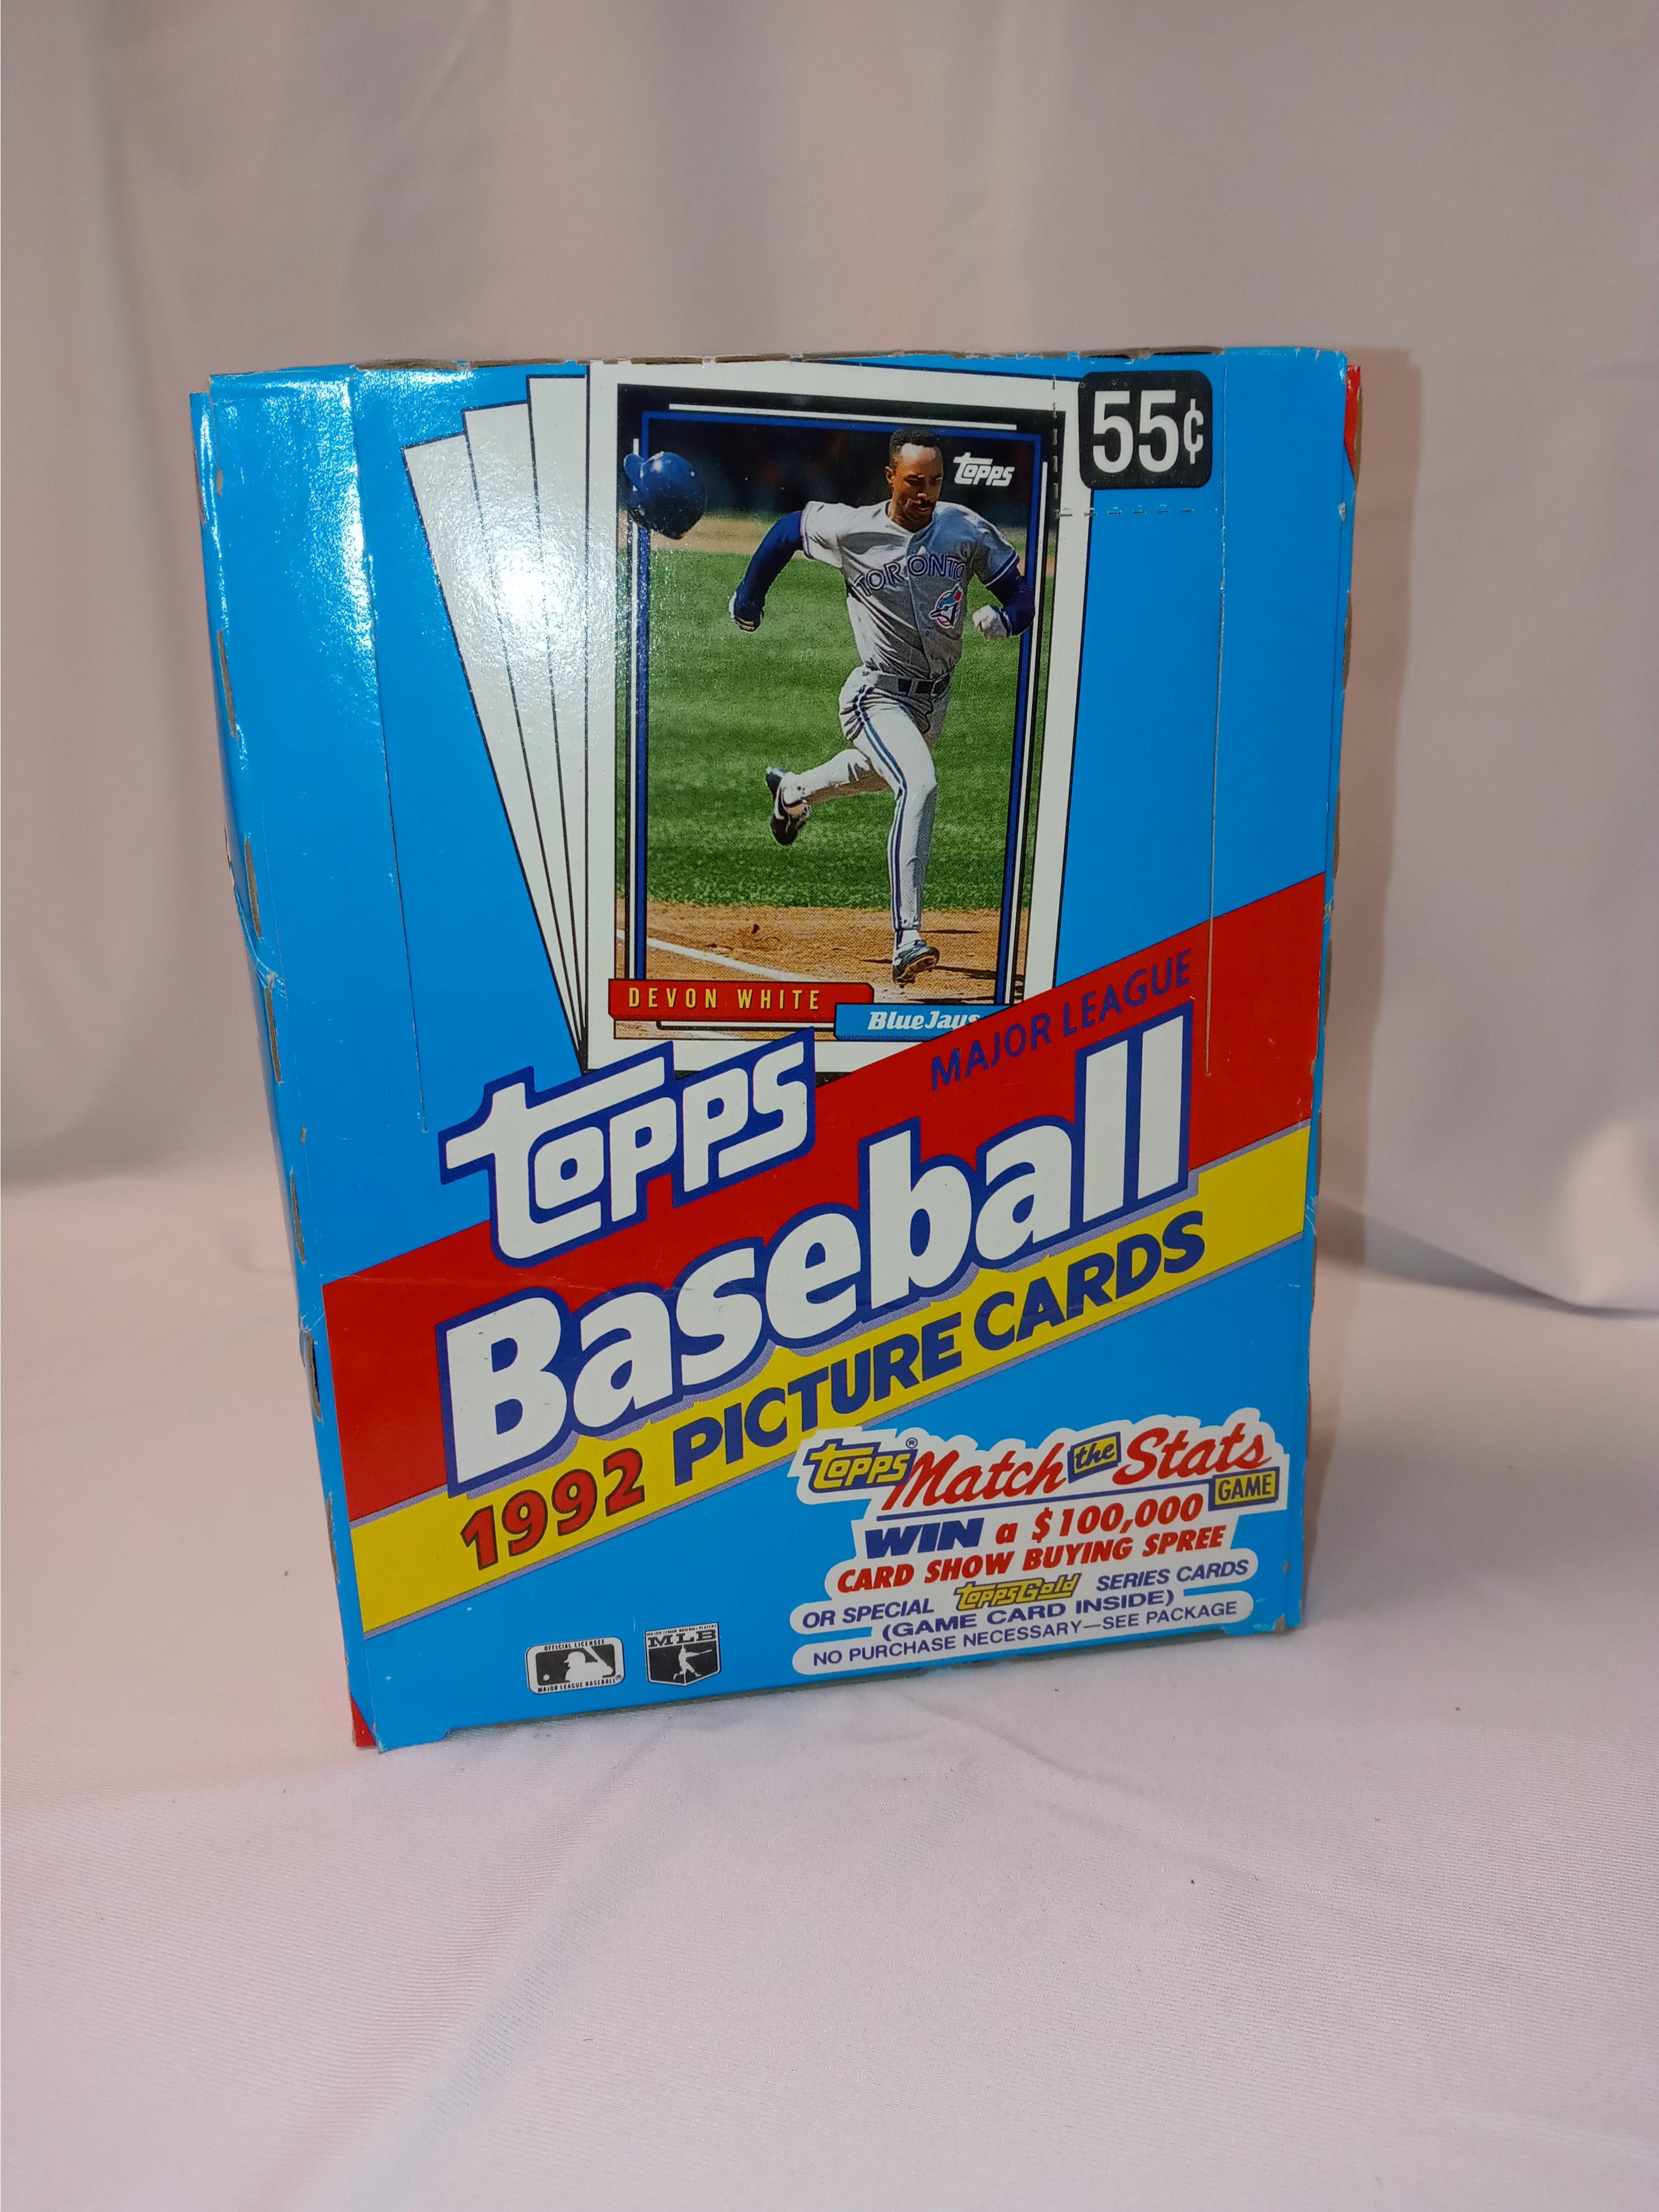 a-guide-to-what-baseball-cards-are-worth-money